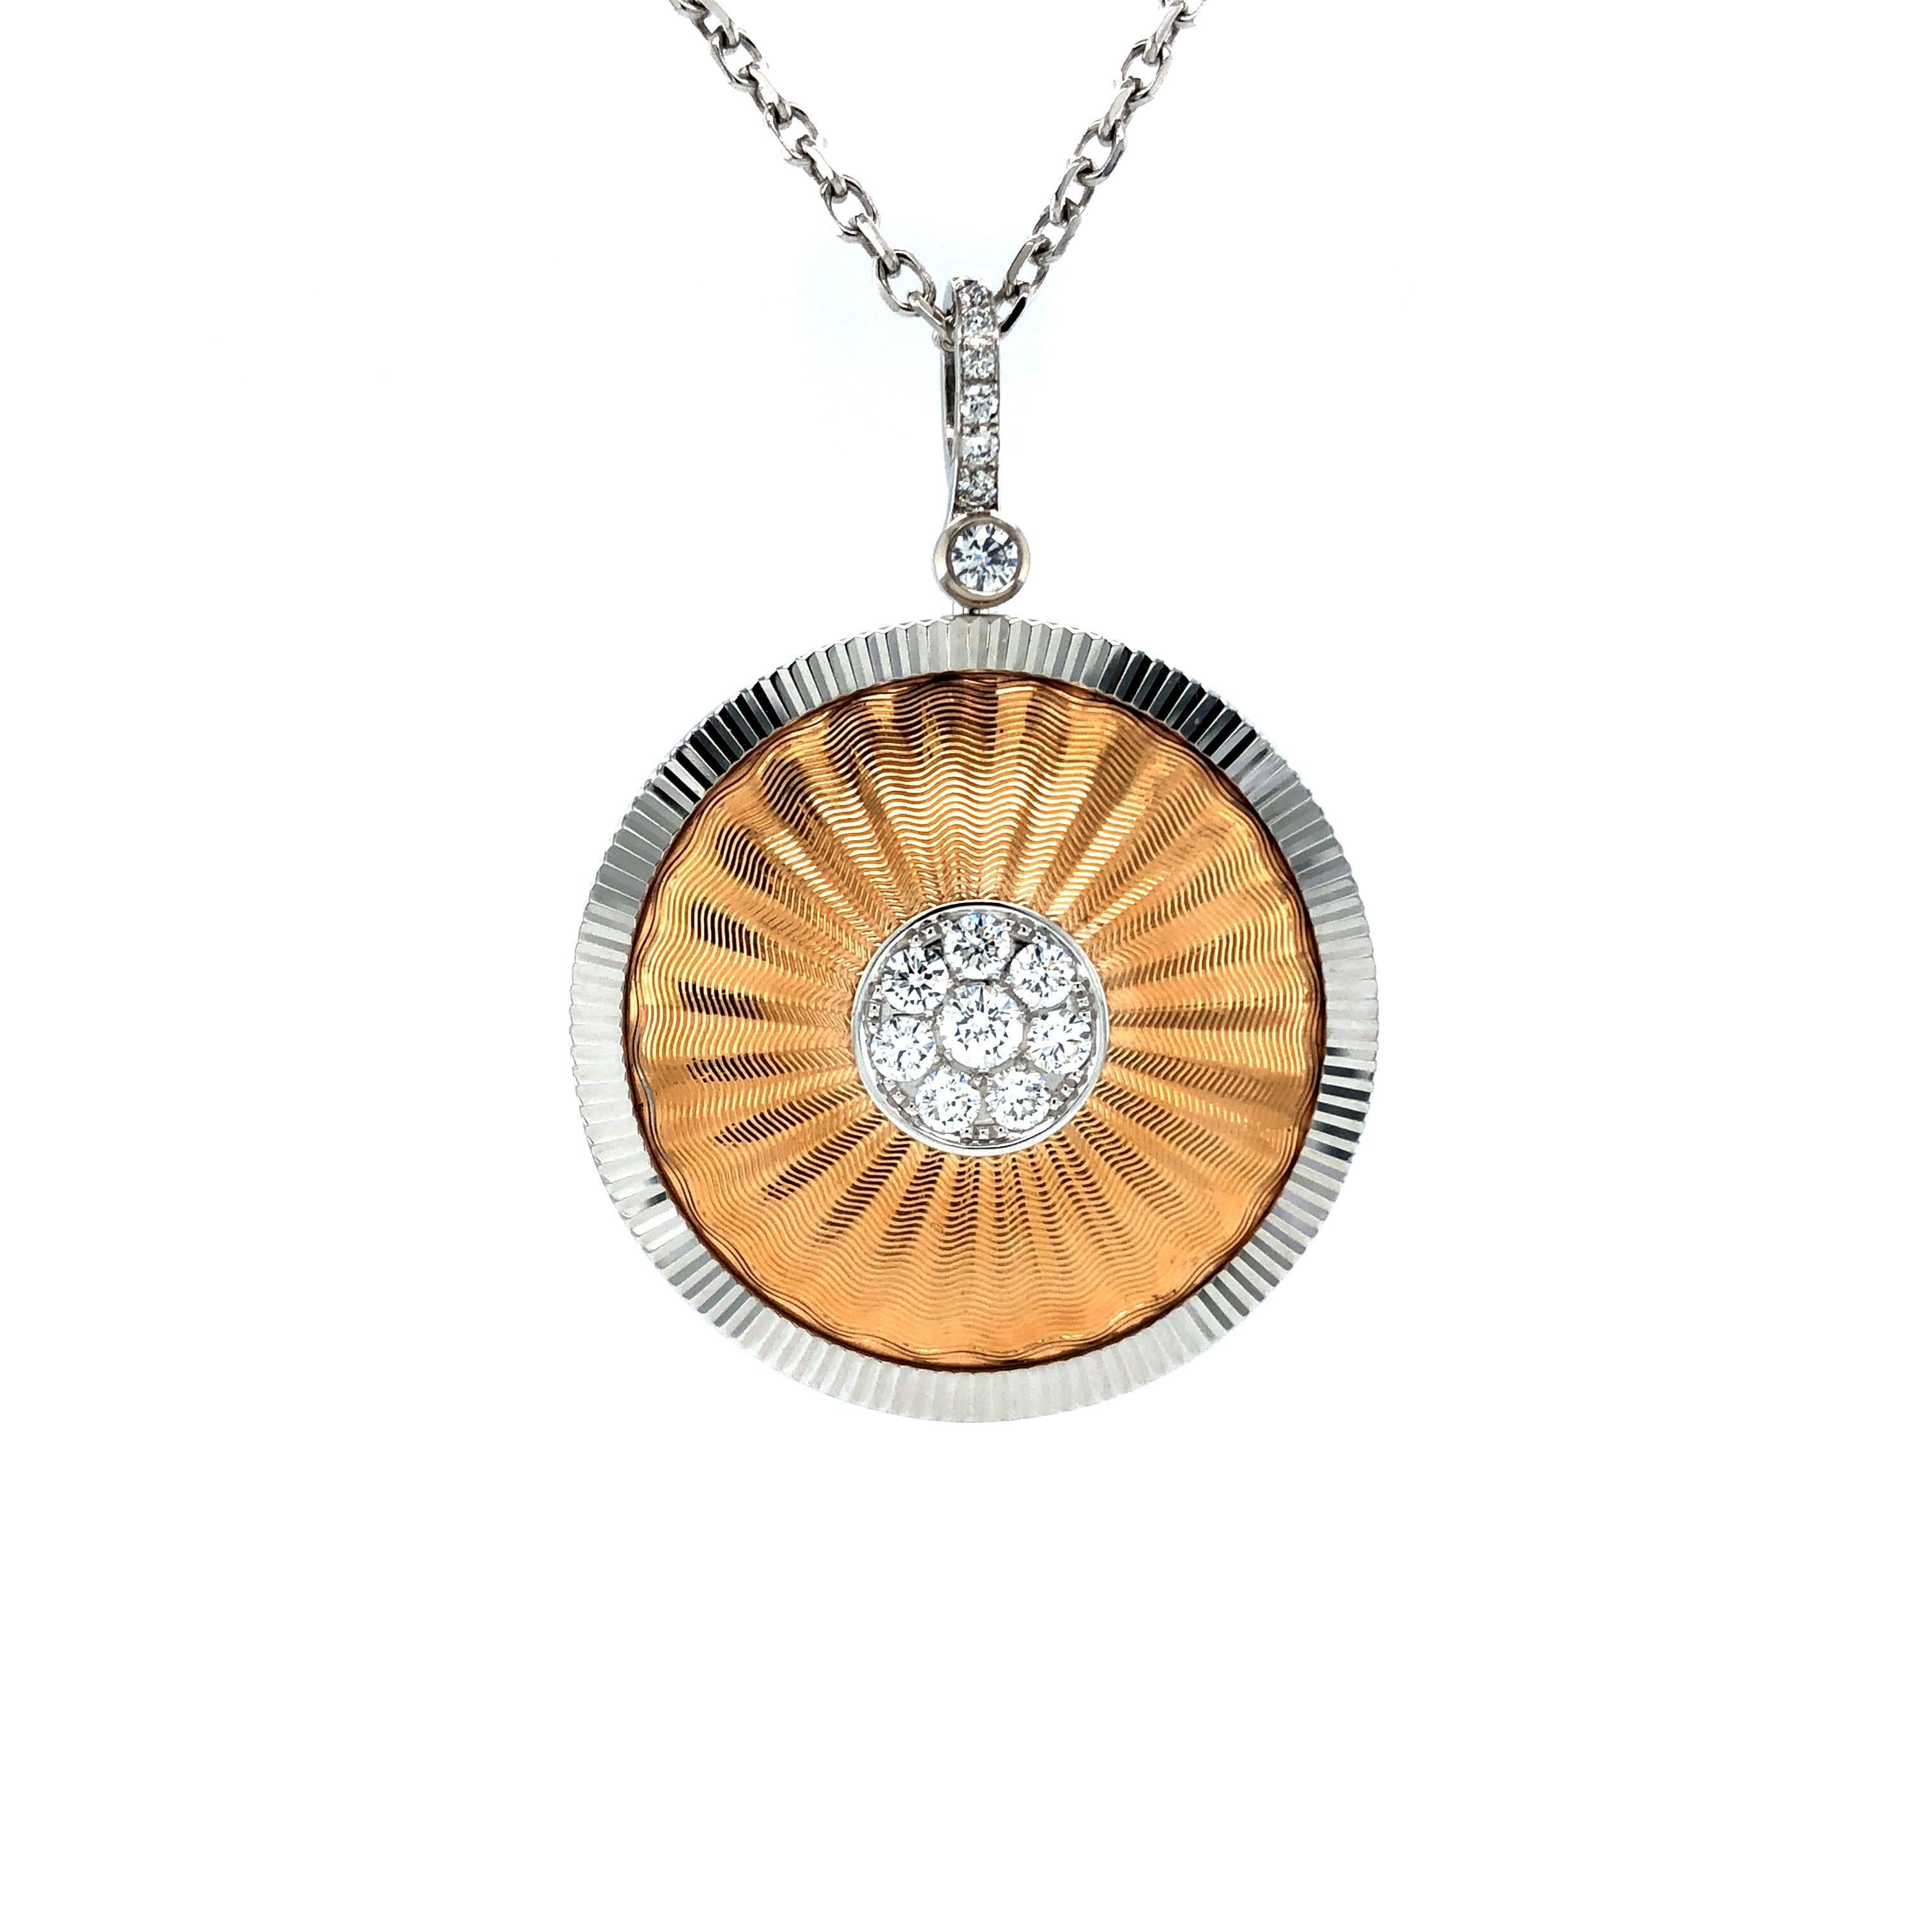 Victor Mayer Round Opera Pendant Necklace 18k White Gold and Rose Gold, 18 Diamonds, total 0.58 ct, G VS

VICTOR MAYER is a fine jewelry house known for its sophisticated craftsmanship. Since 1989, the company has been closely associated with the